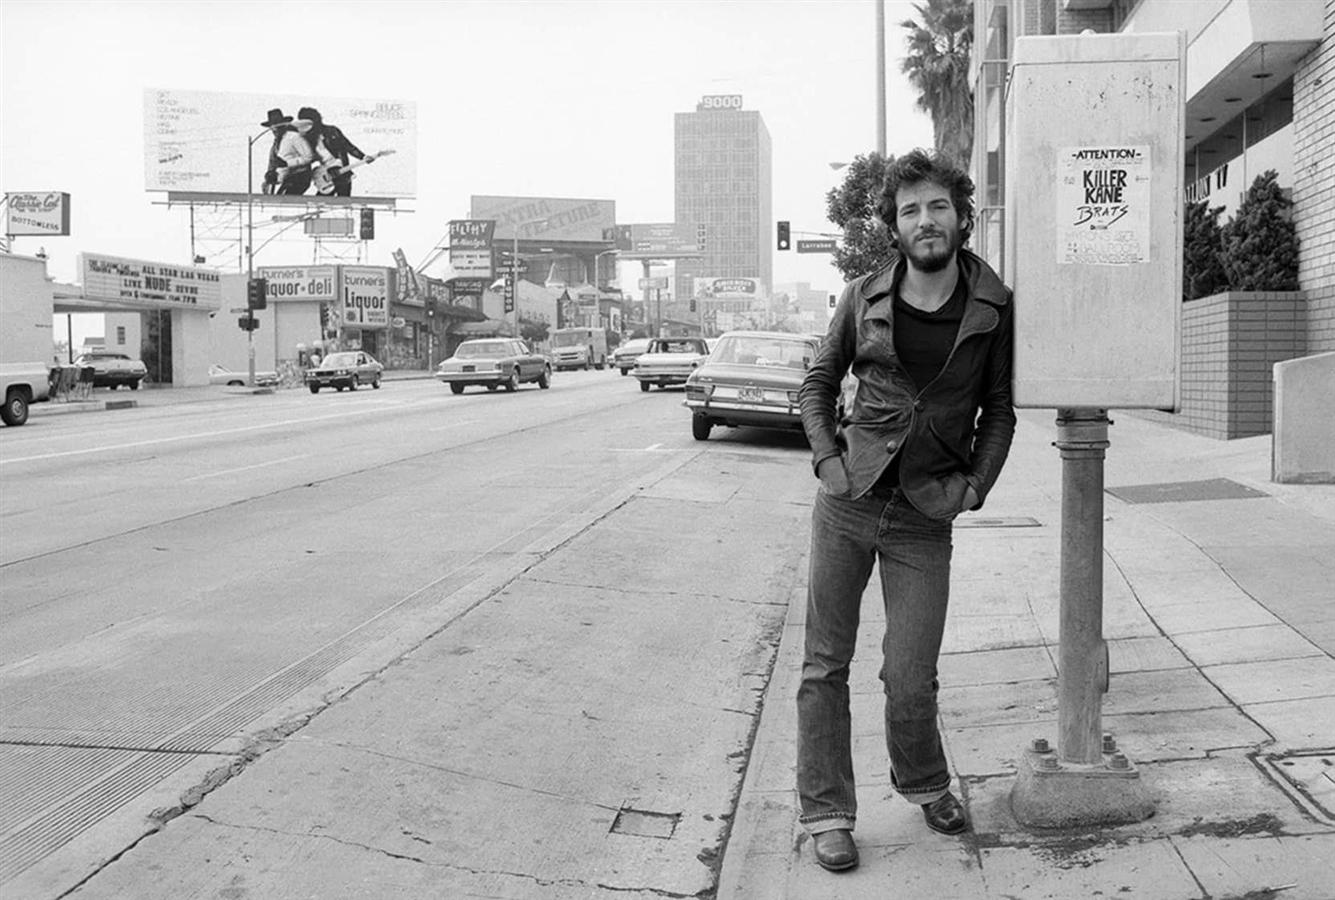 Terry O'Neill Portrait Photograph - Bruce Springsteen on the Sunset Strip, Los Angeles (Signed)